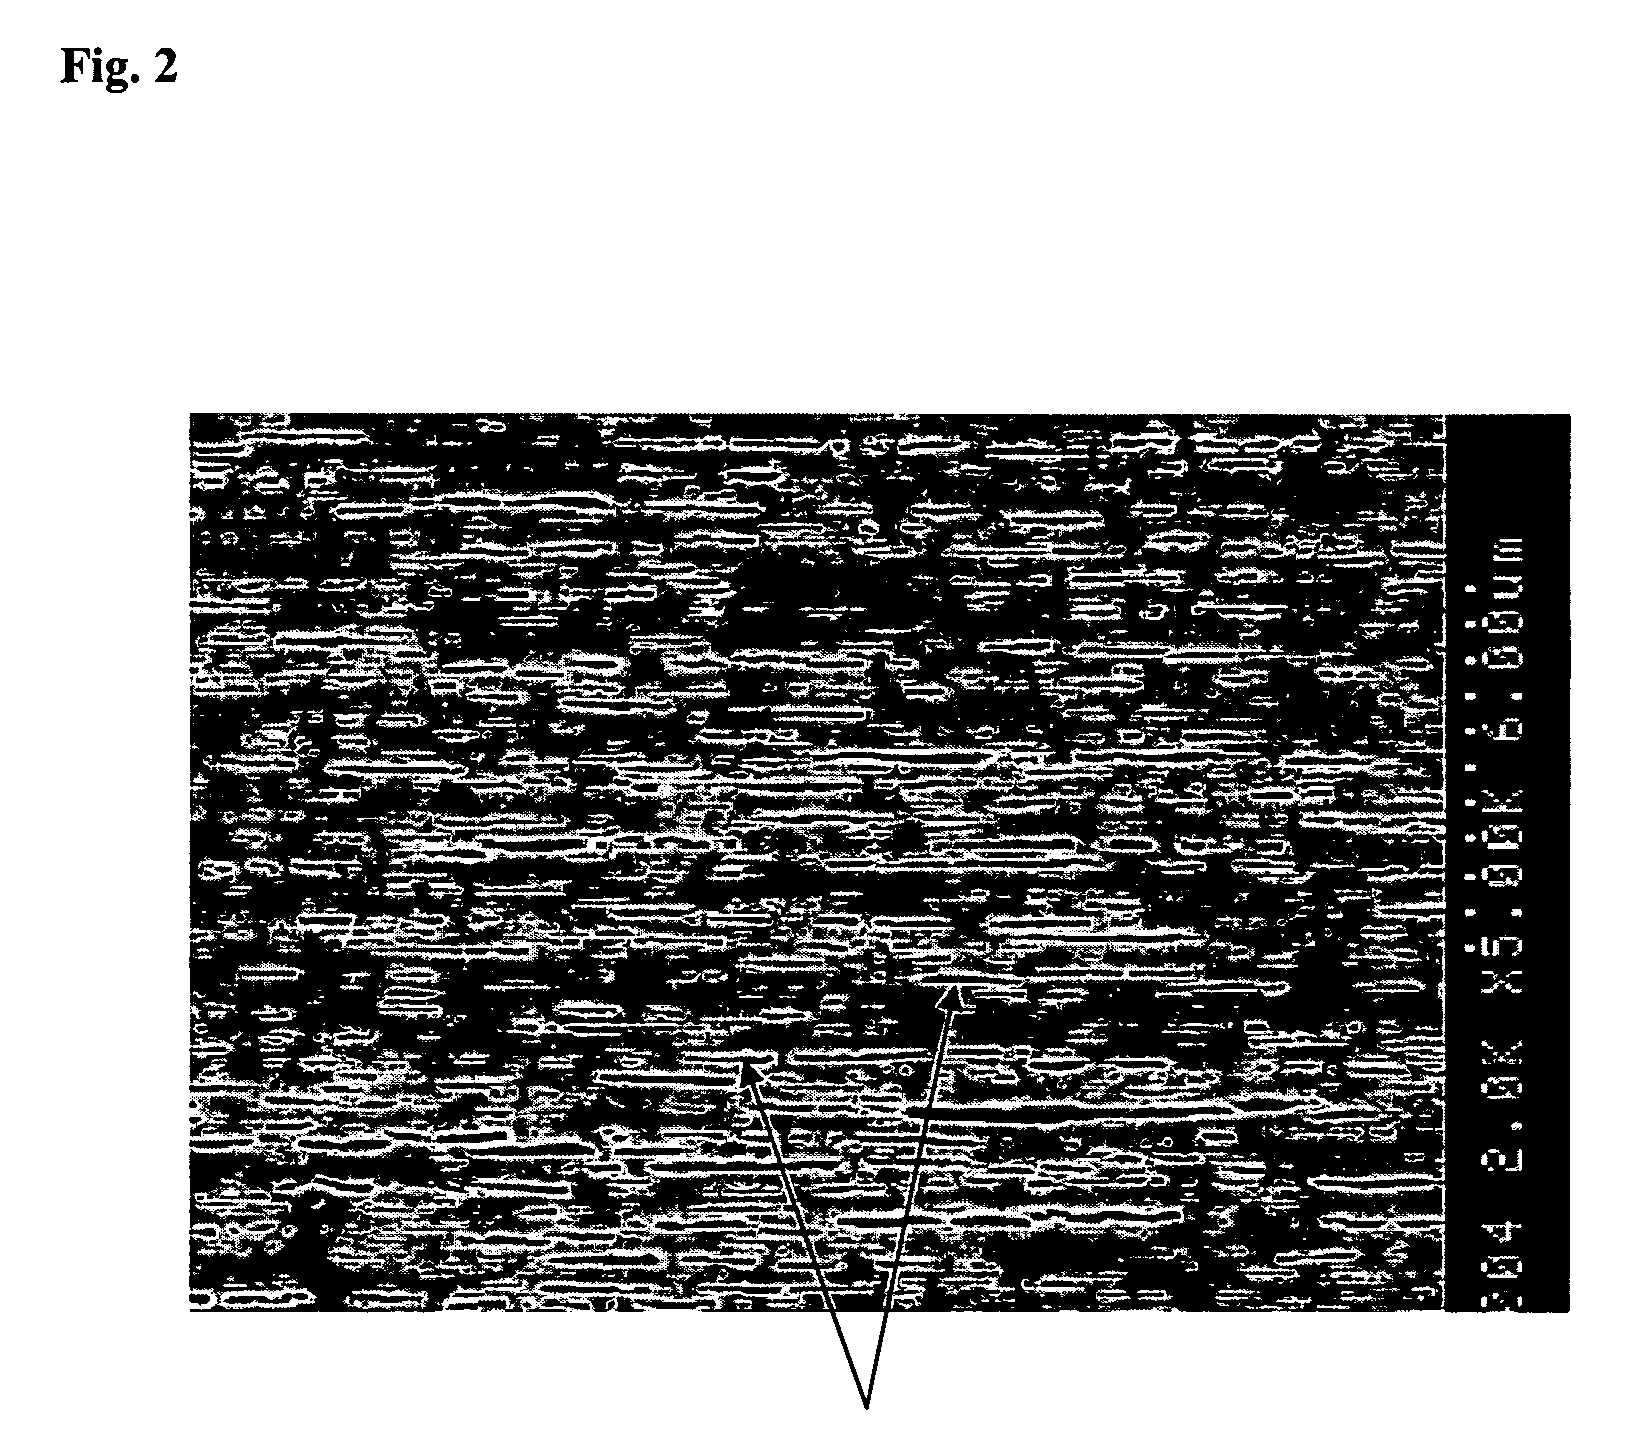 Biaxially oriented white polypropylene film for thermal transfer recording and receiving sheet for thermal transfer recording therefrom